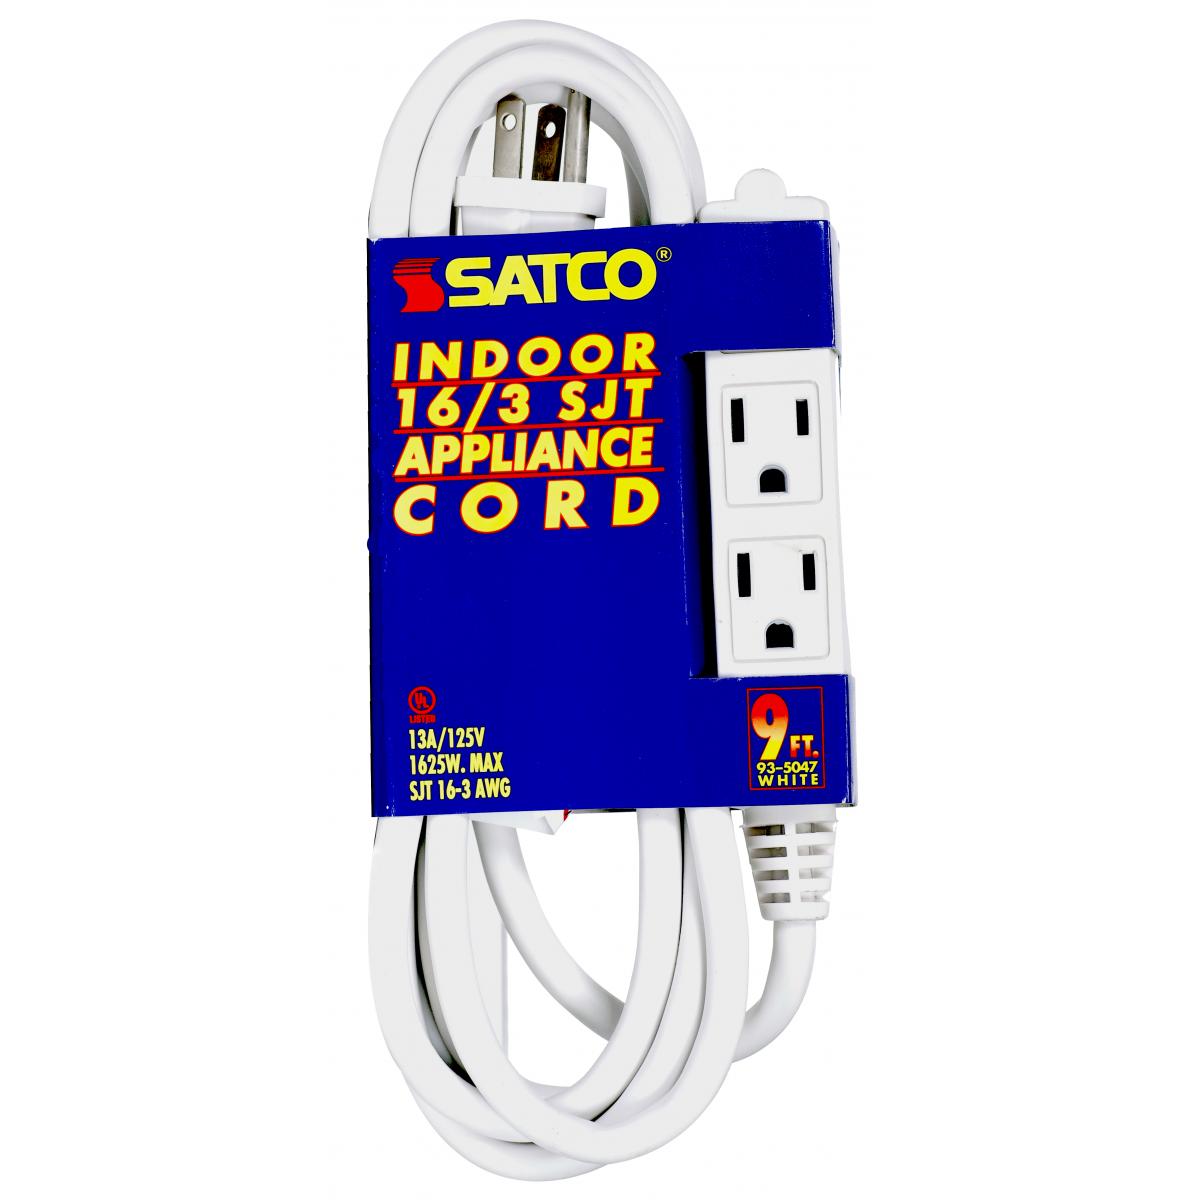 93-5047 9 FT 16/3 SJT WHITE 3 WIRE GRD